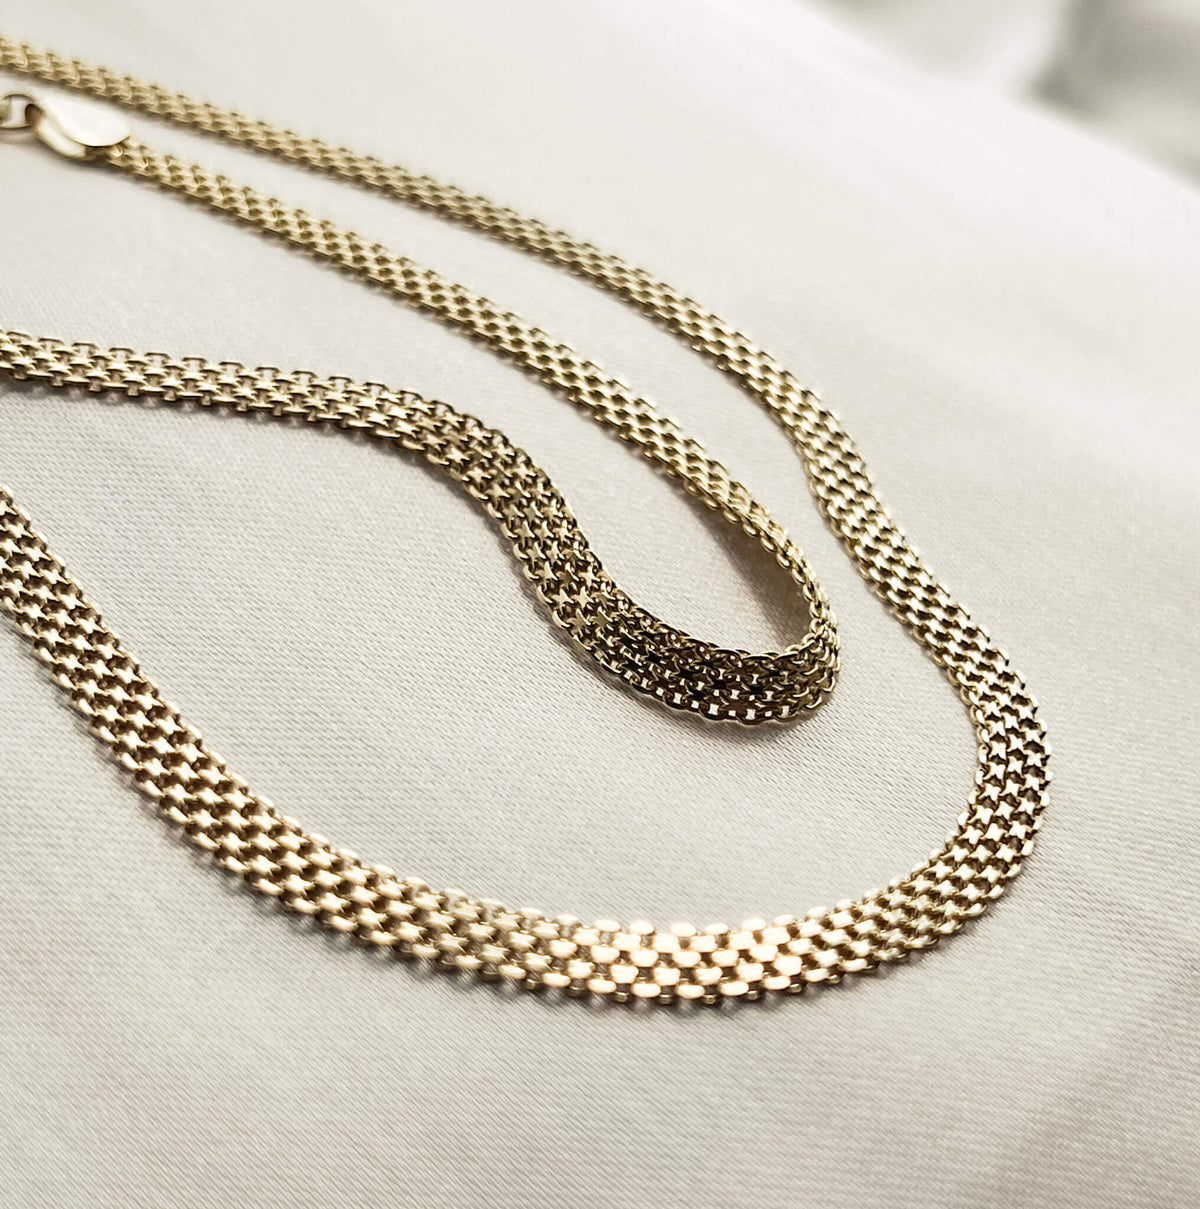 This is the gold debonair chain and the matching gold bracelet pictured on soft silk. The chain has a unique texture and design which folds in an elegant way. It has an extension clasp so it can be worn as a choker or extended. 